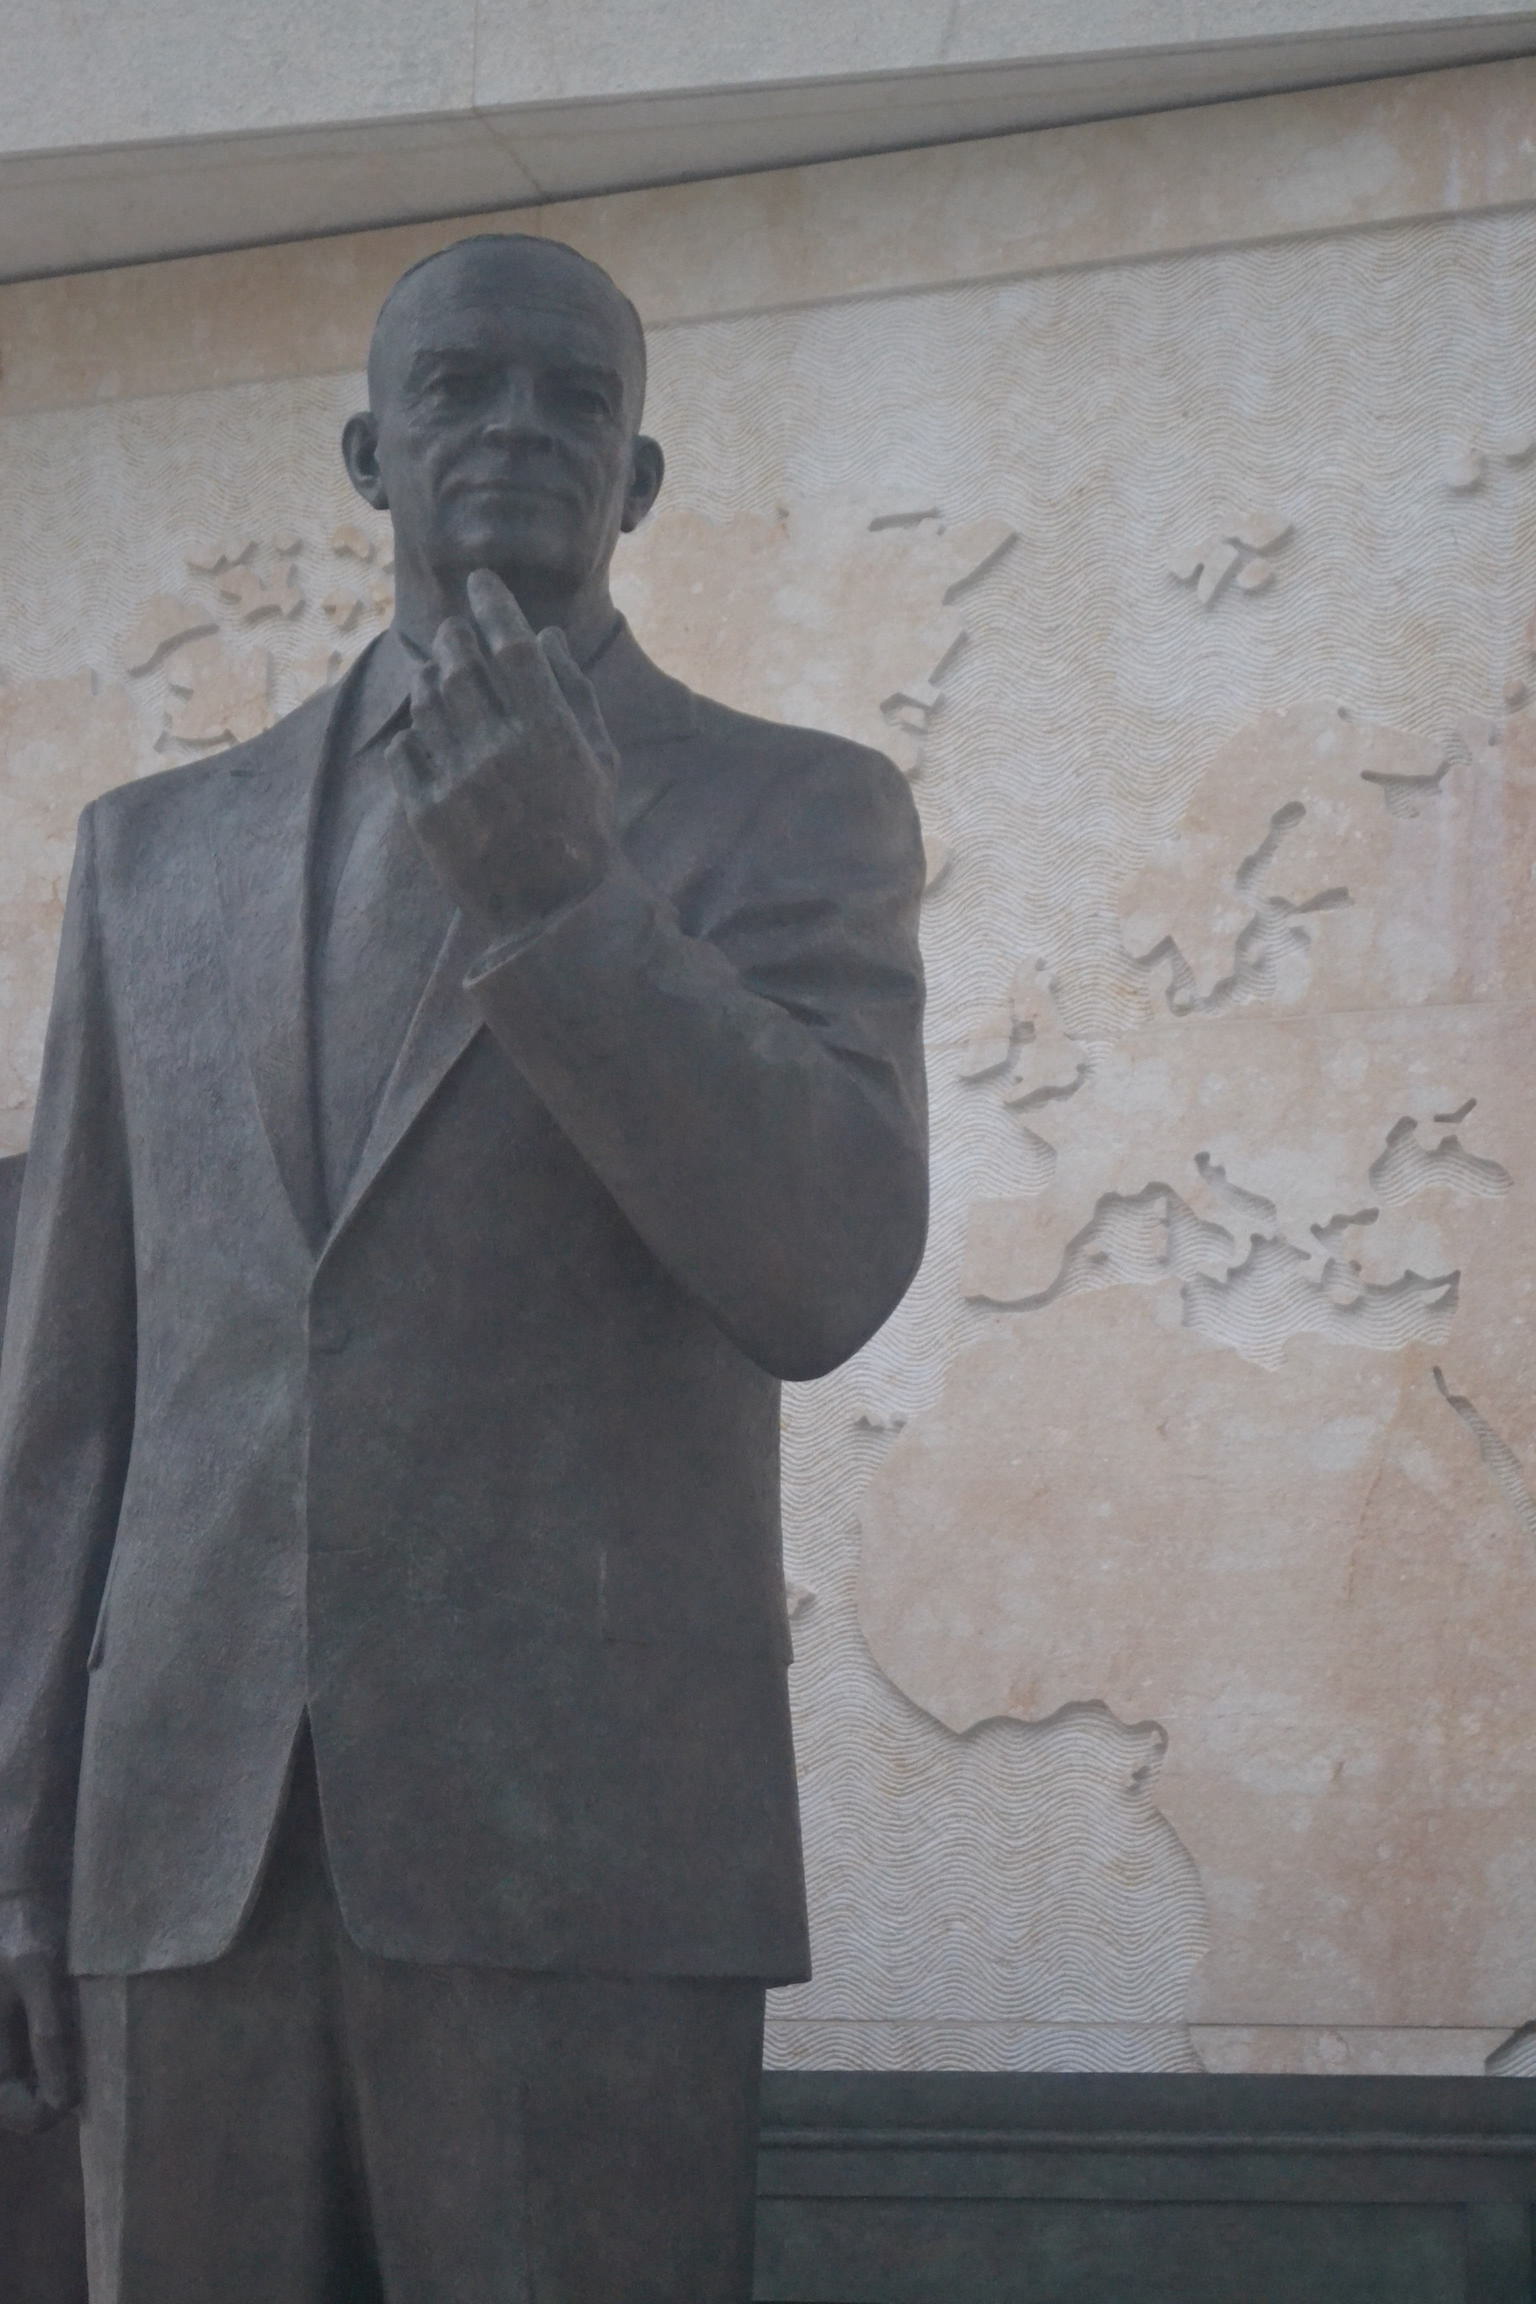 A bronze statue of a man in a suit before a piece of a world map.